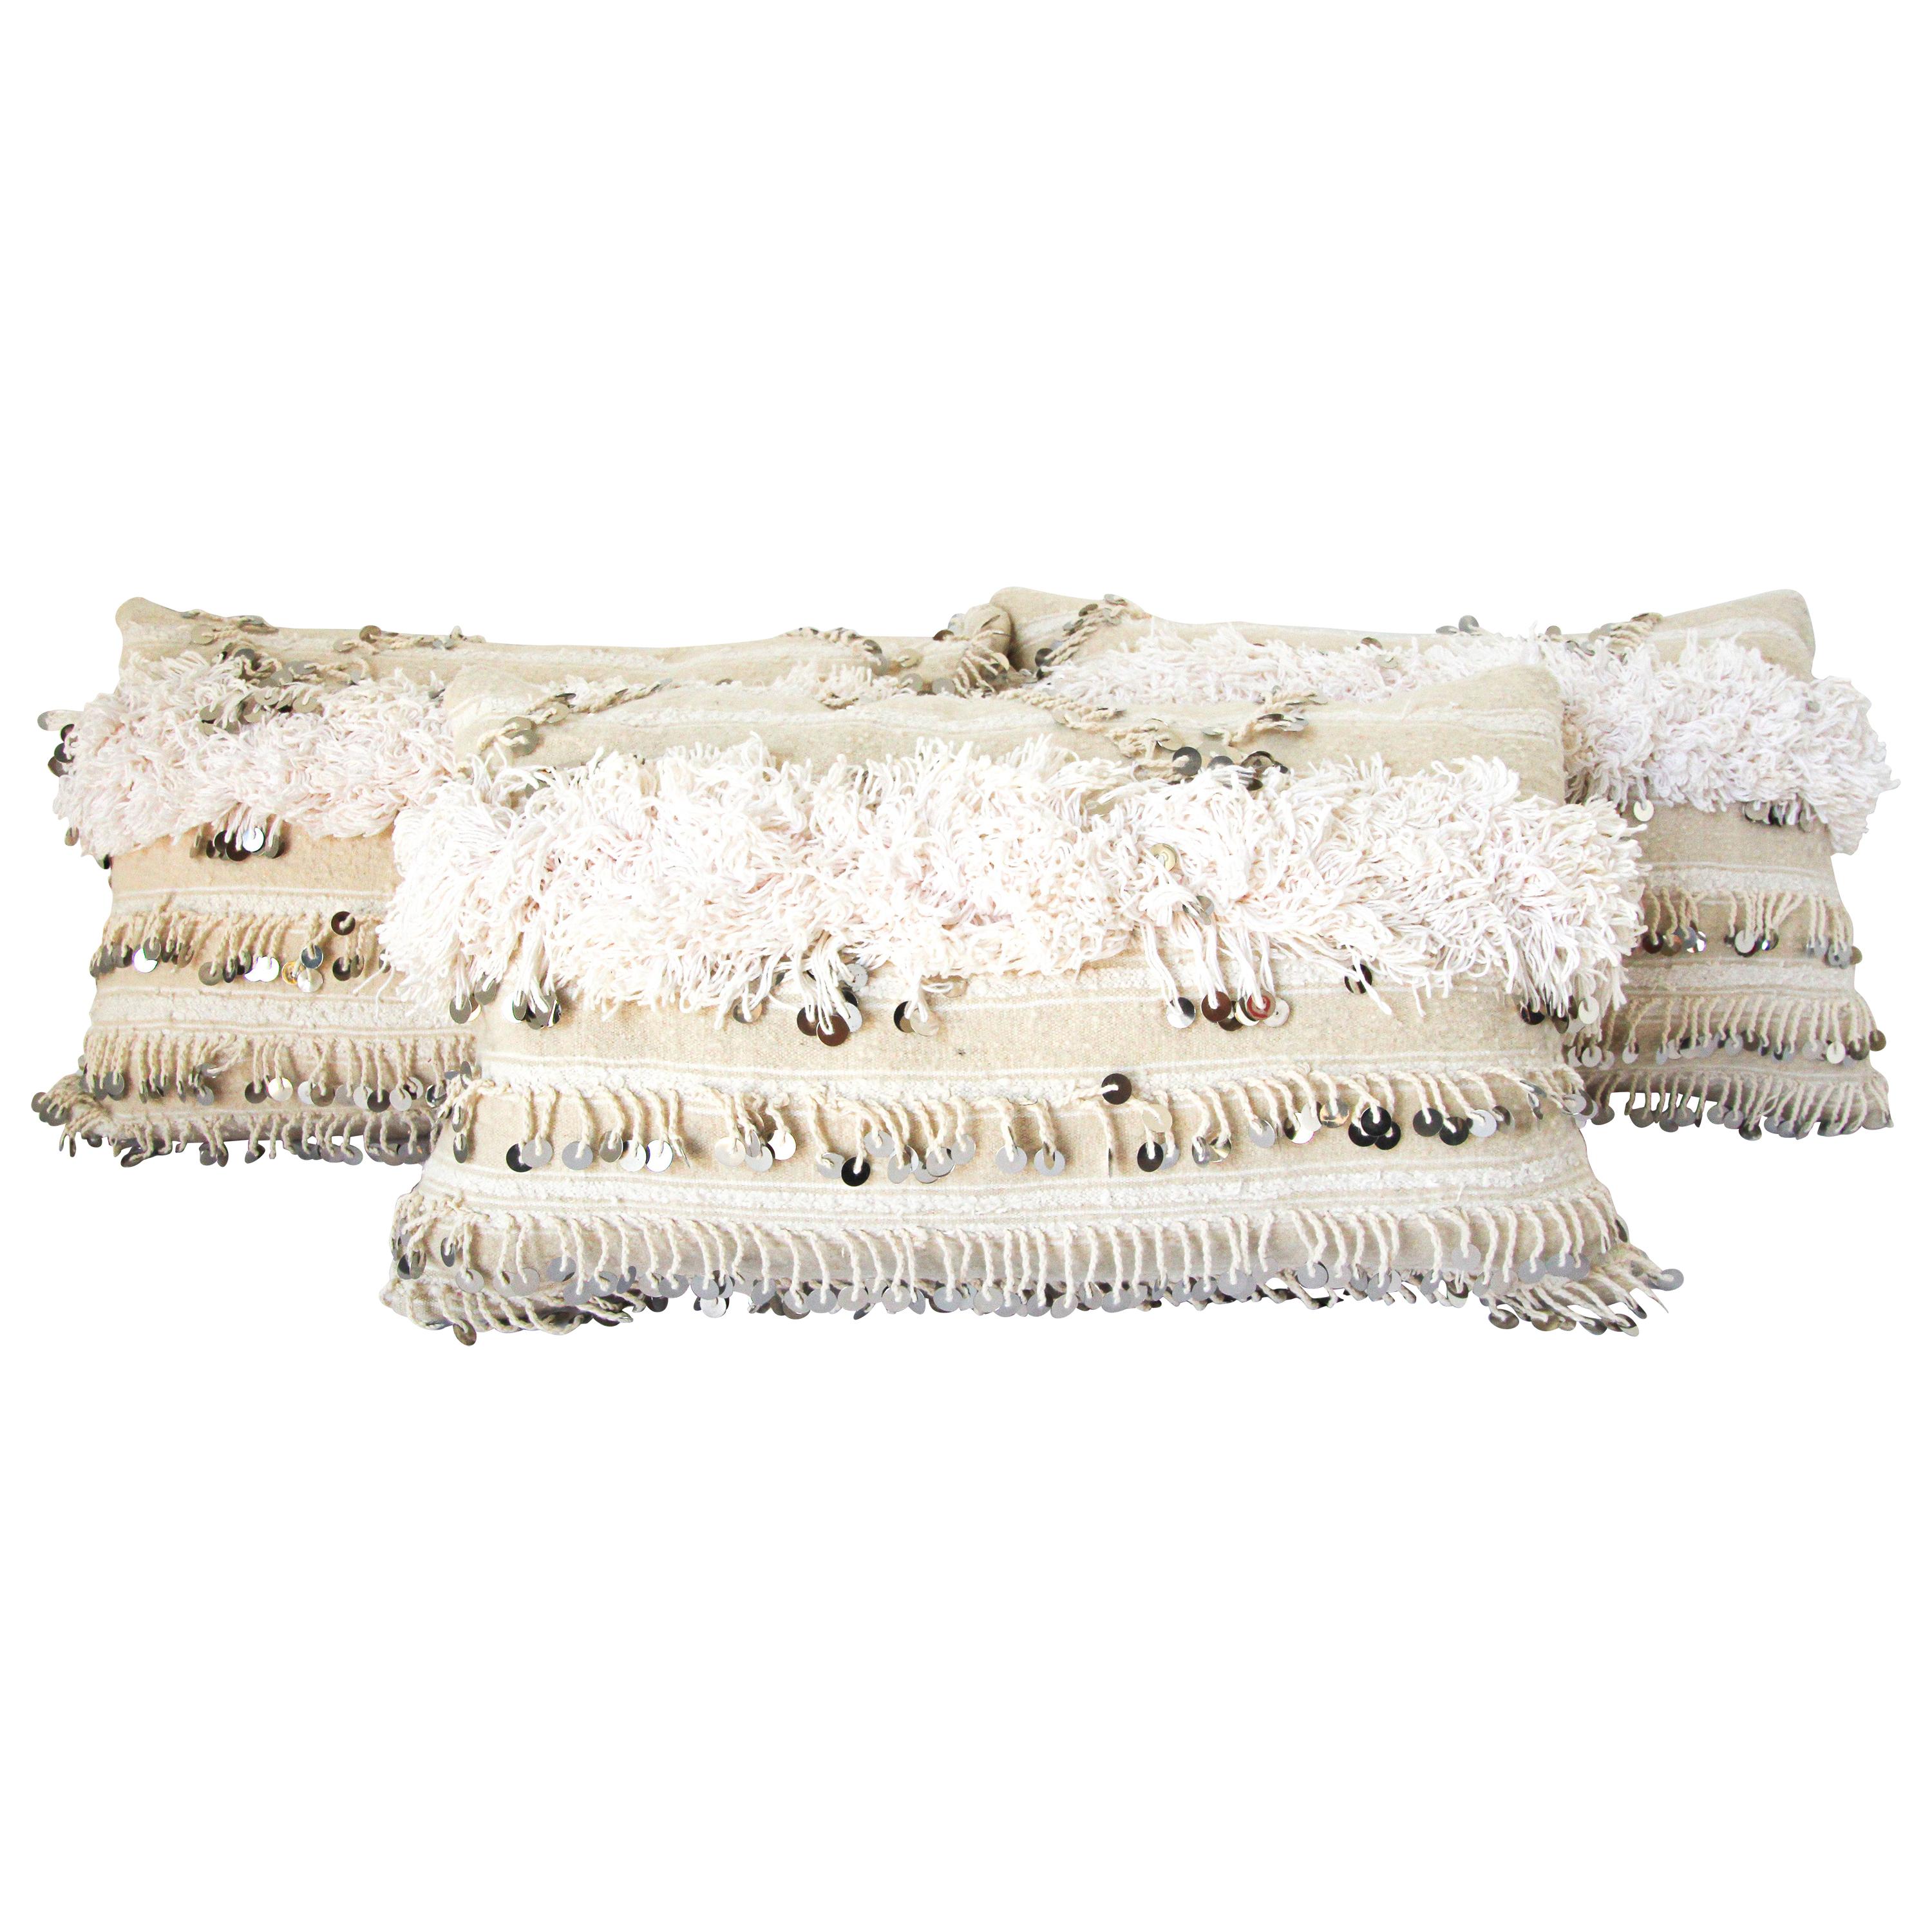 Moroccan White Tribal Pillows with Silver Sequins and Long Fringes